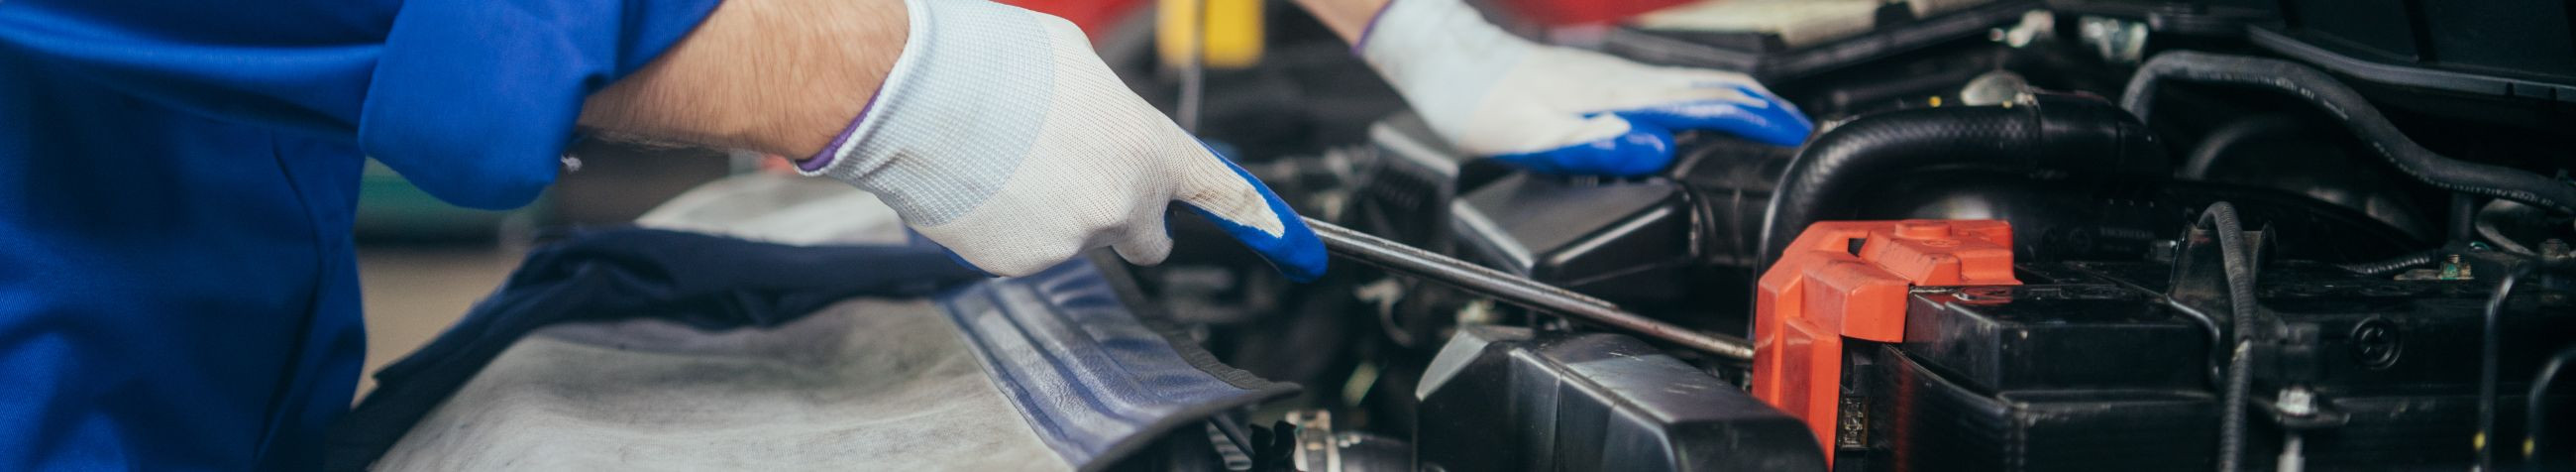 Cleaning of fuel system, recreational vehicle repair shop, replacement of spare parts, reconstruction, Bodywork, strengthening of the body, repair of generators, Repair of engines, repair of starters, welding work